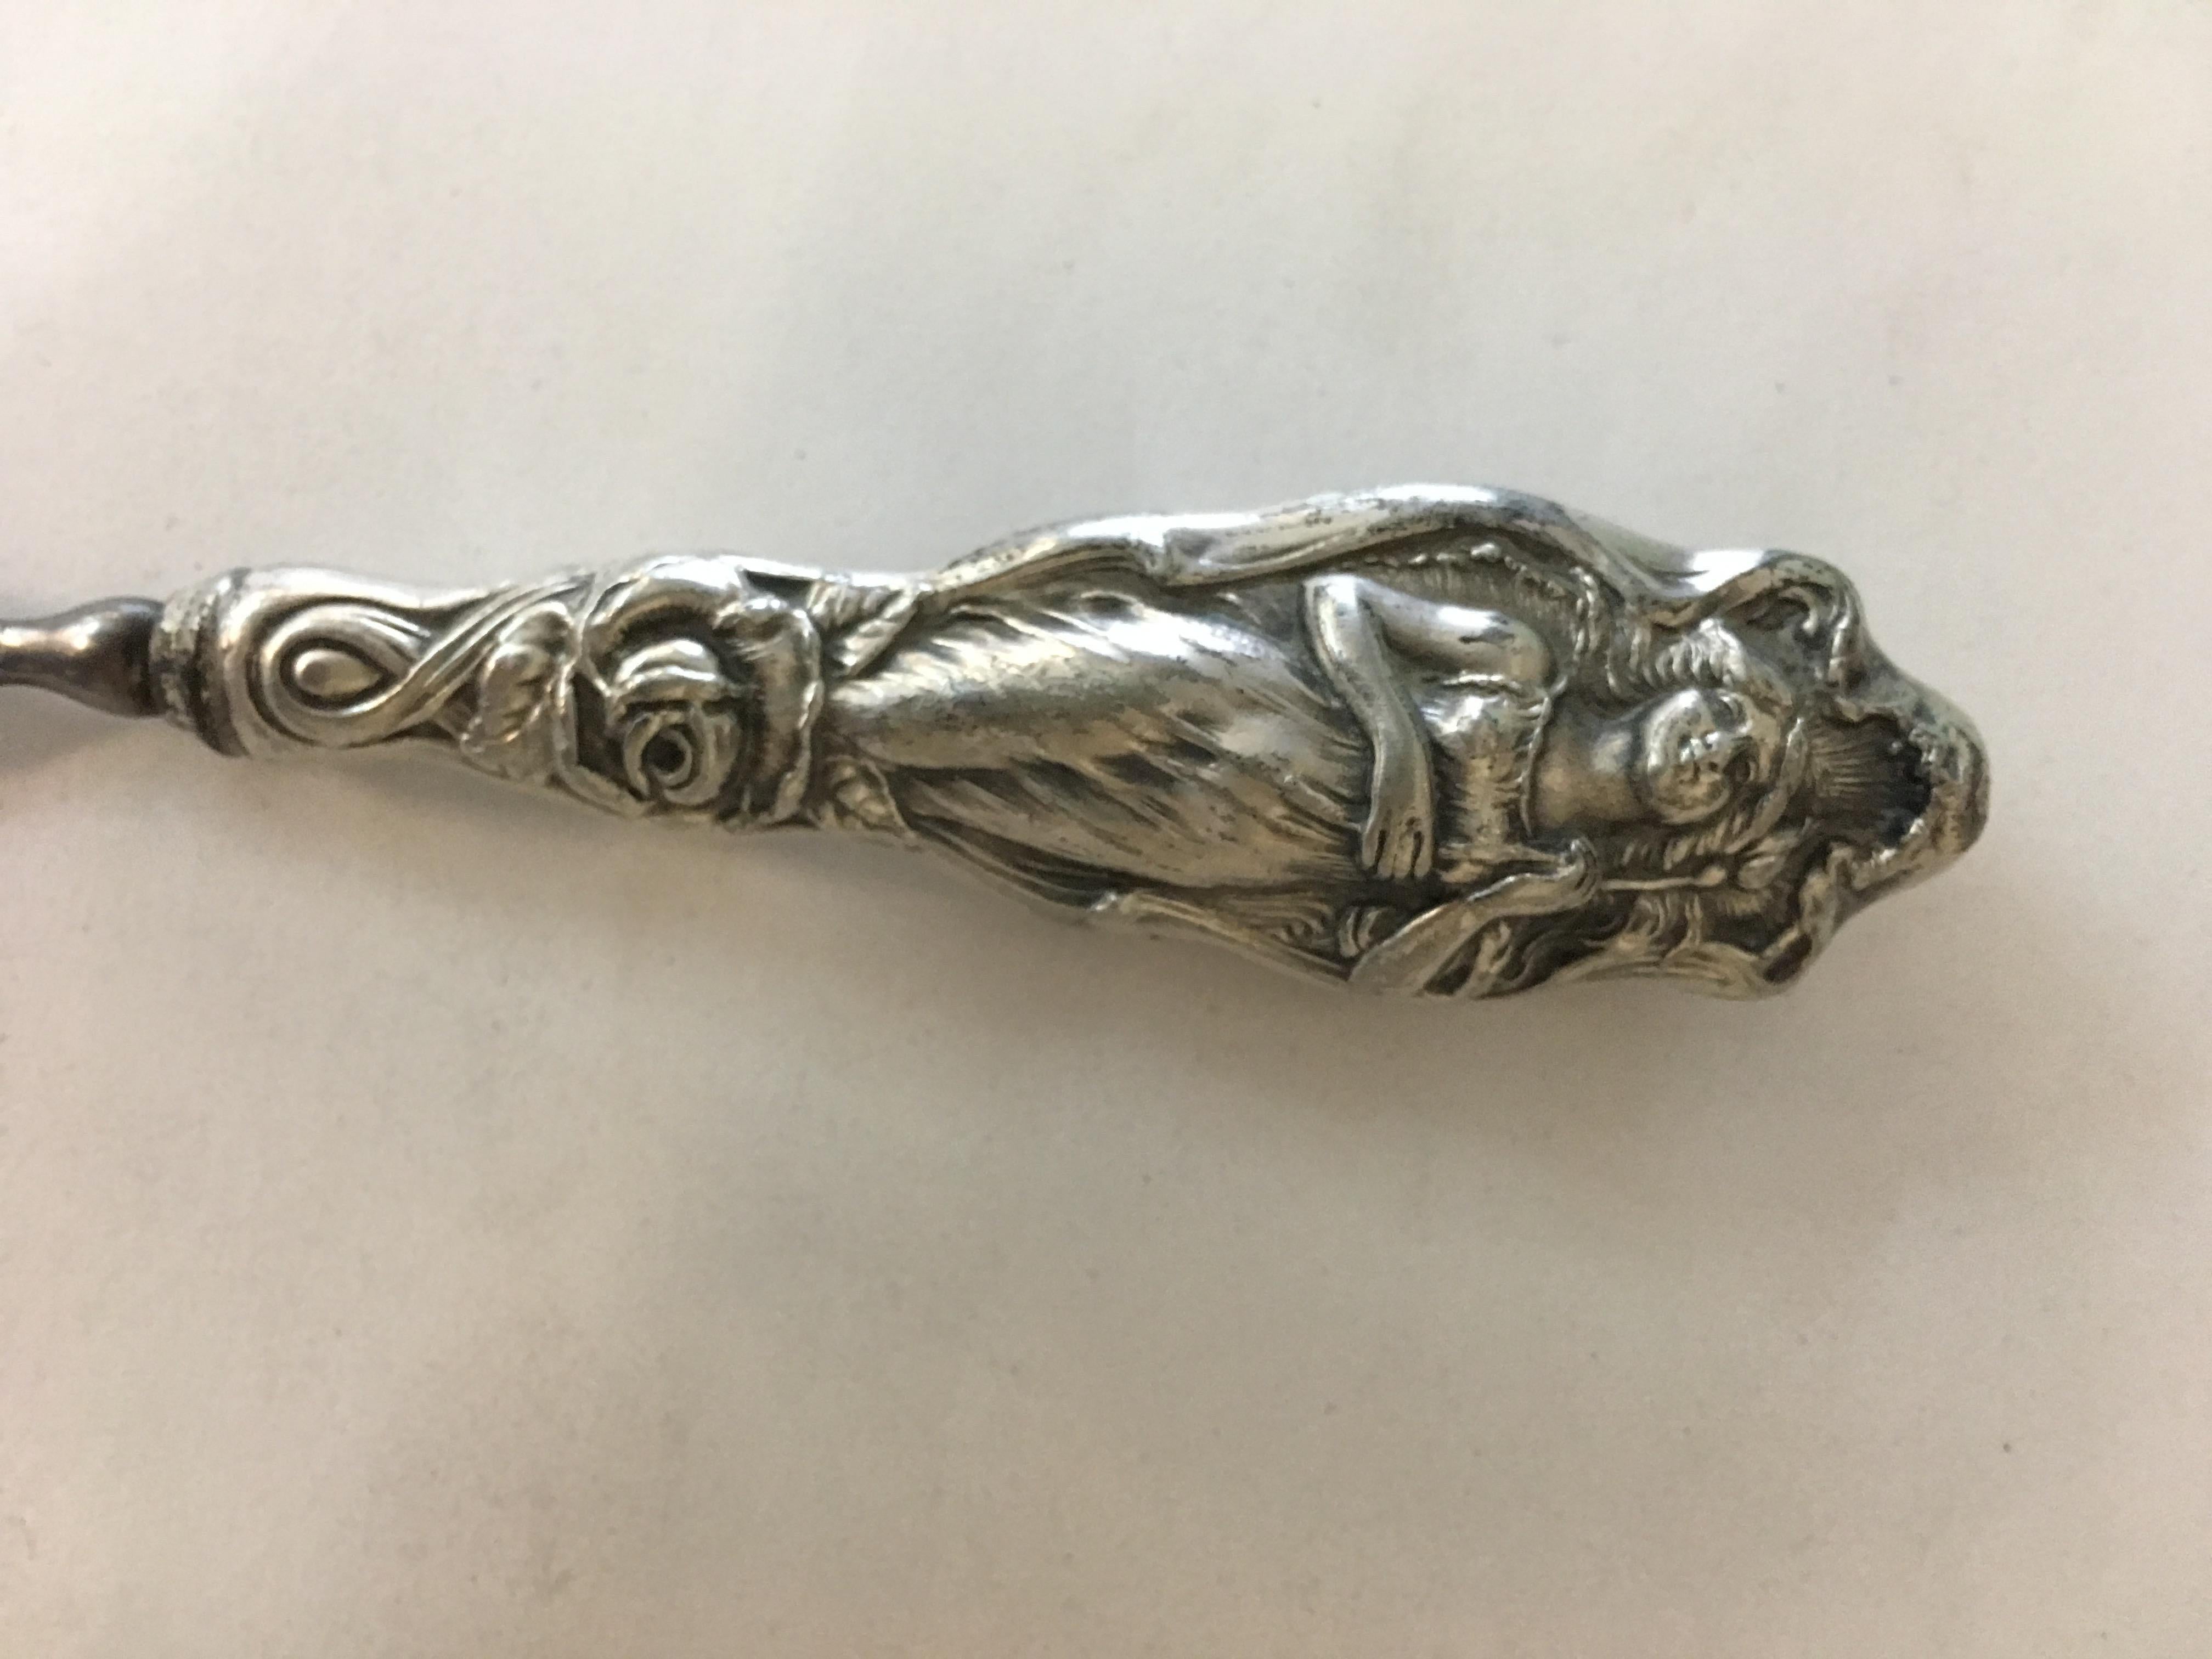 This piece is a silver plate nail file with Art Nouveau designs along the front. The handle features a relief of a woman holding a flower in great detail, circa 1900.